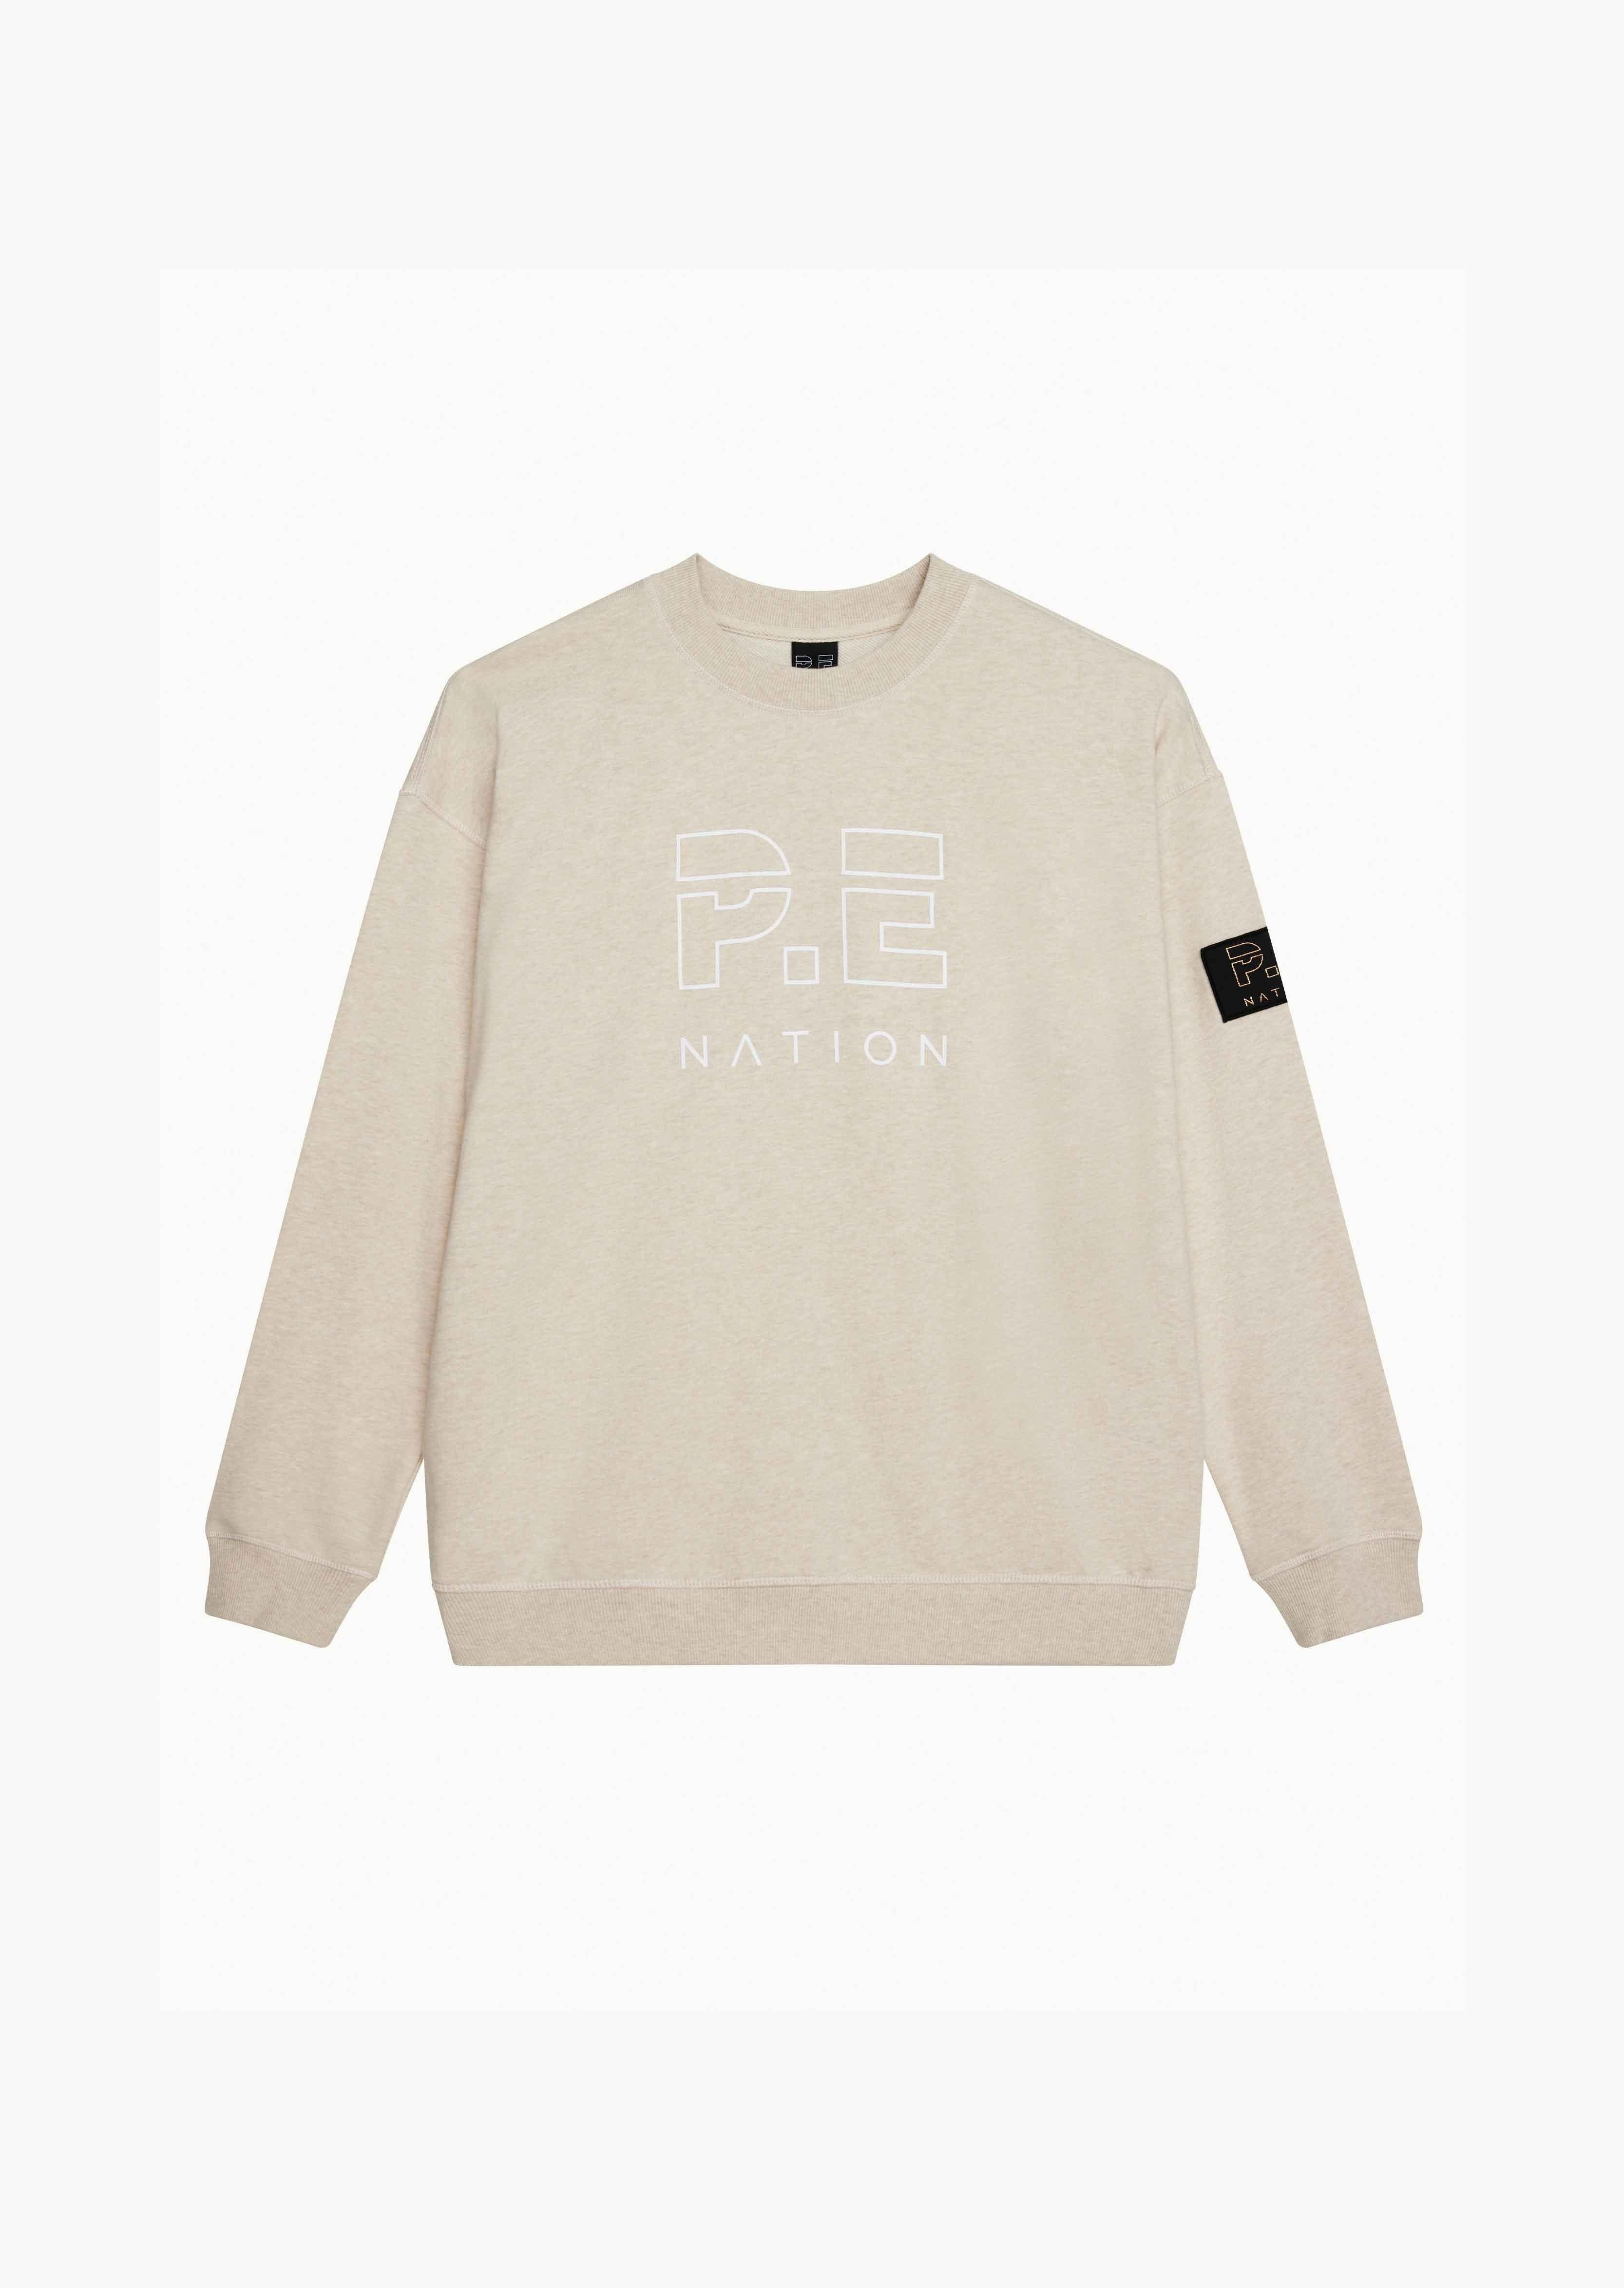 HEADS UP SWEAT IN OATMEAL MARLE by P.E NATION